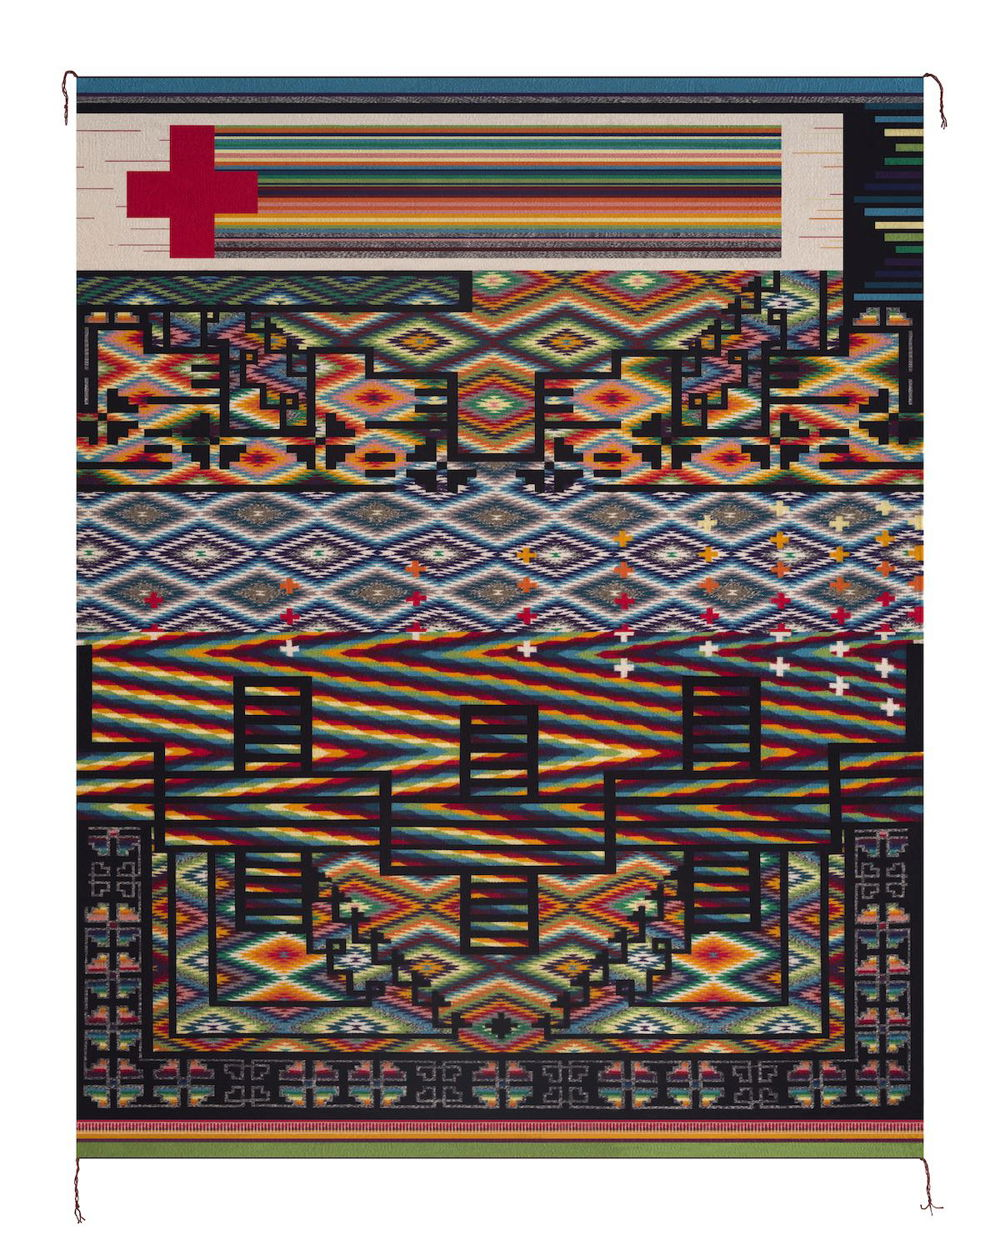 A vertical wall hanging covered in clashing geometric patterns. Thick black lines, resembling architectural blueprints, as well as more traditional designs, are superimposed atop a bright spectrum of colors and patterns beneath.